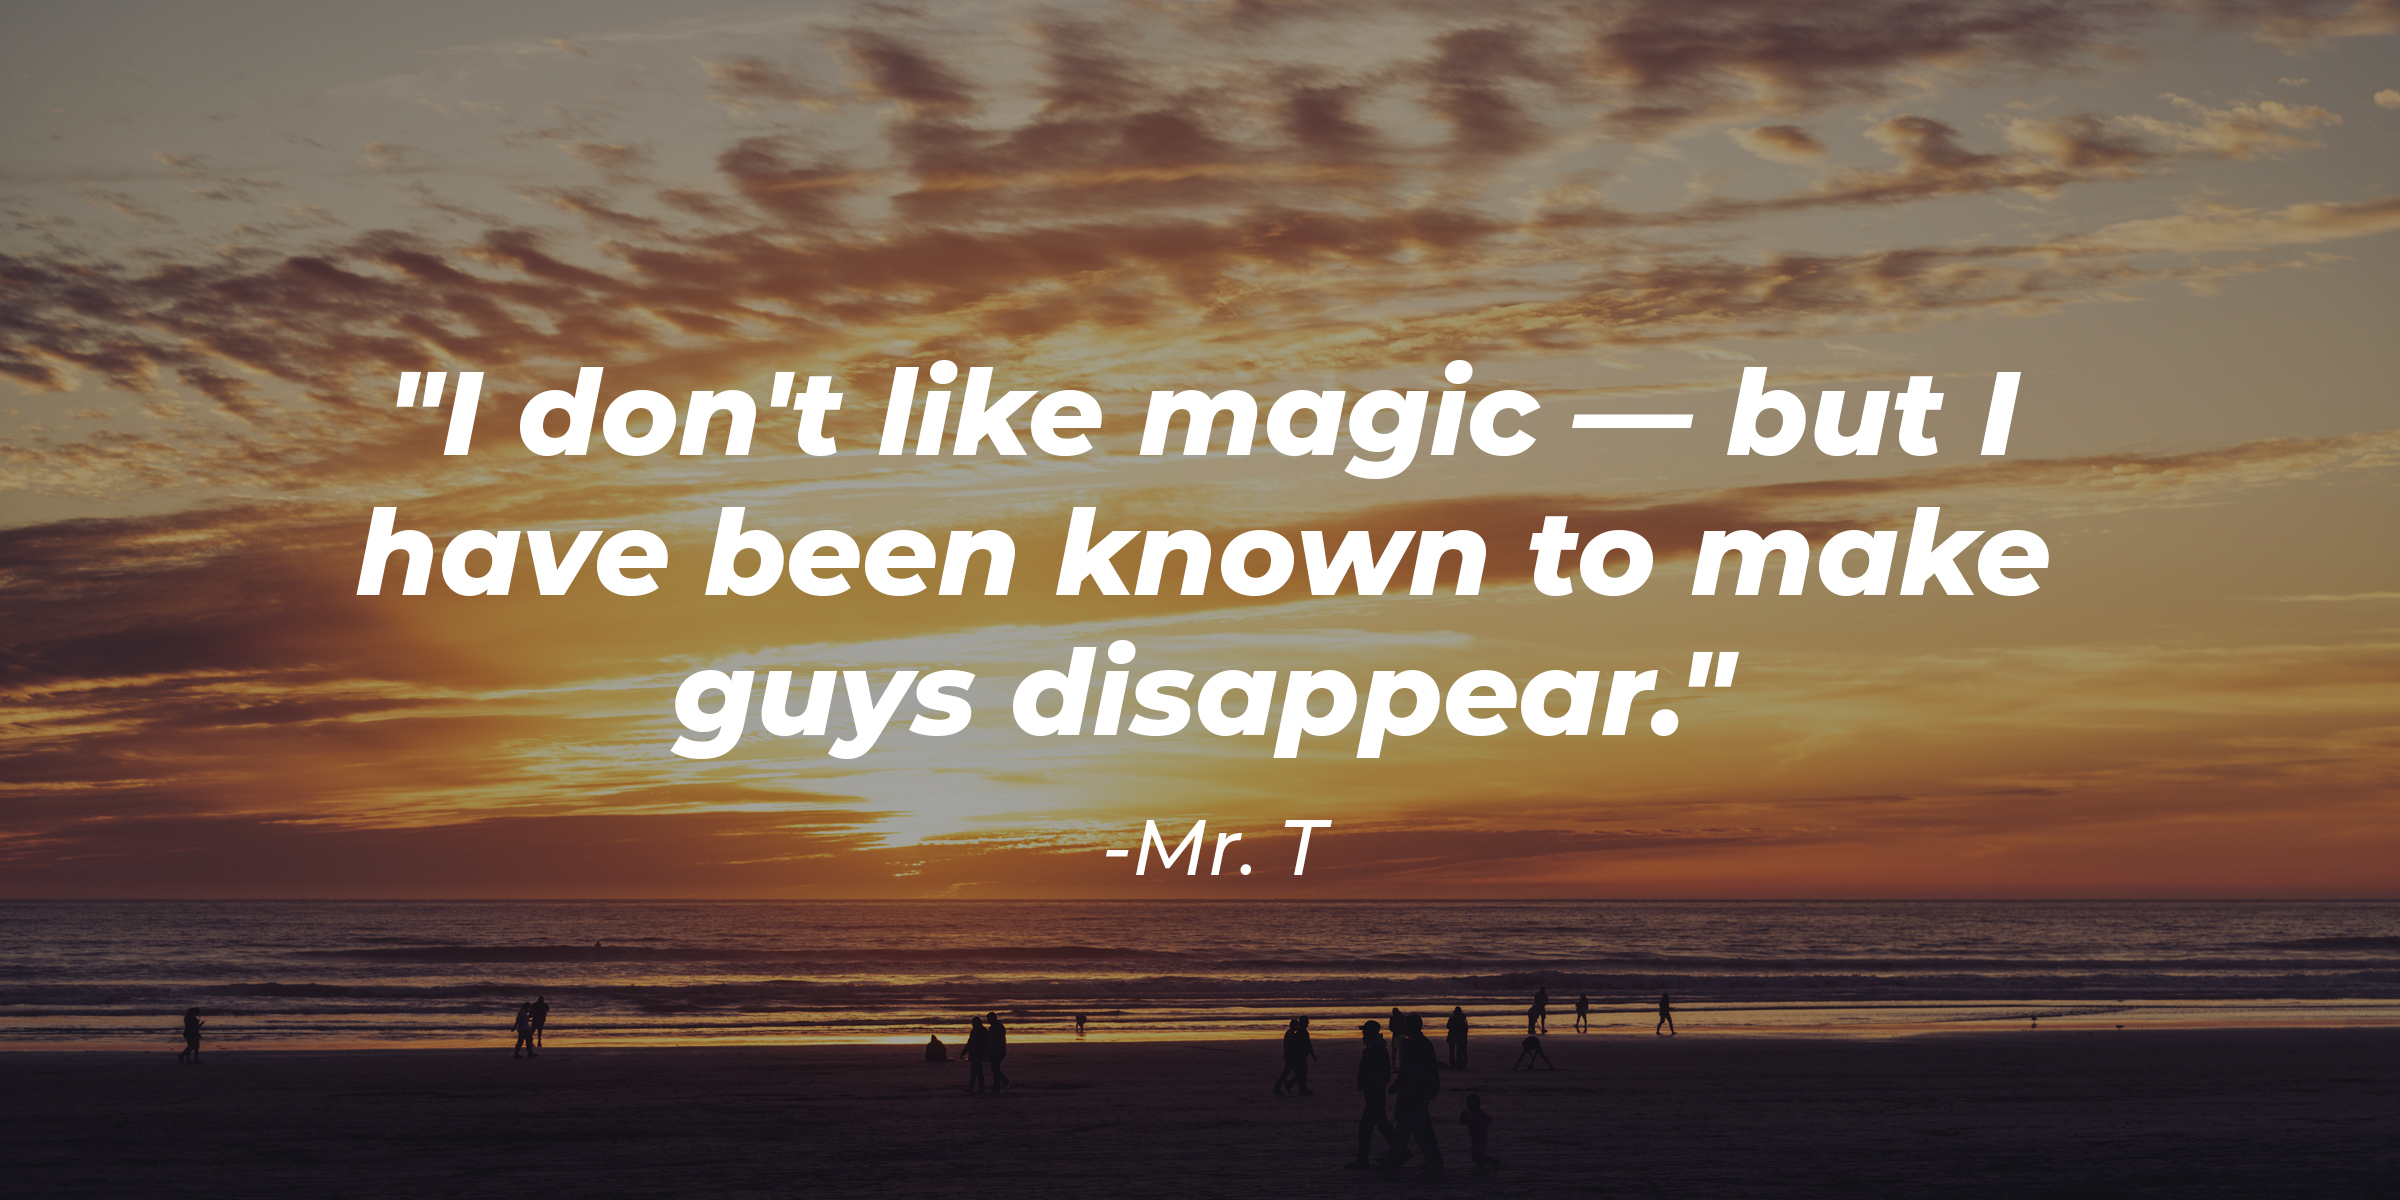 Unsplash | Photo of the beach at sunset with the quote: "I don't like magic—but I have been known to make guys disappear."